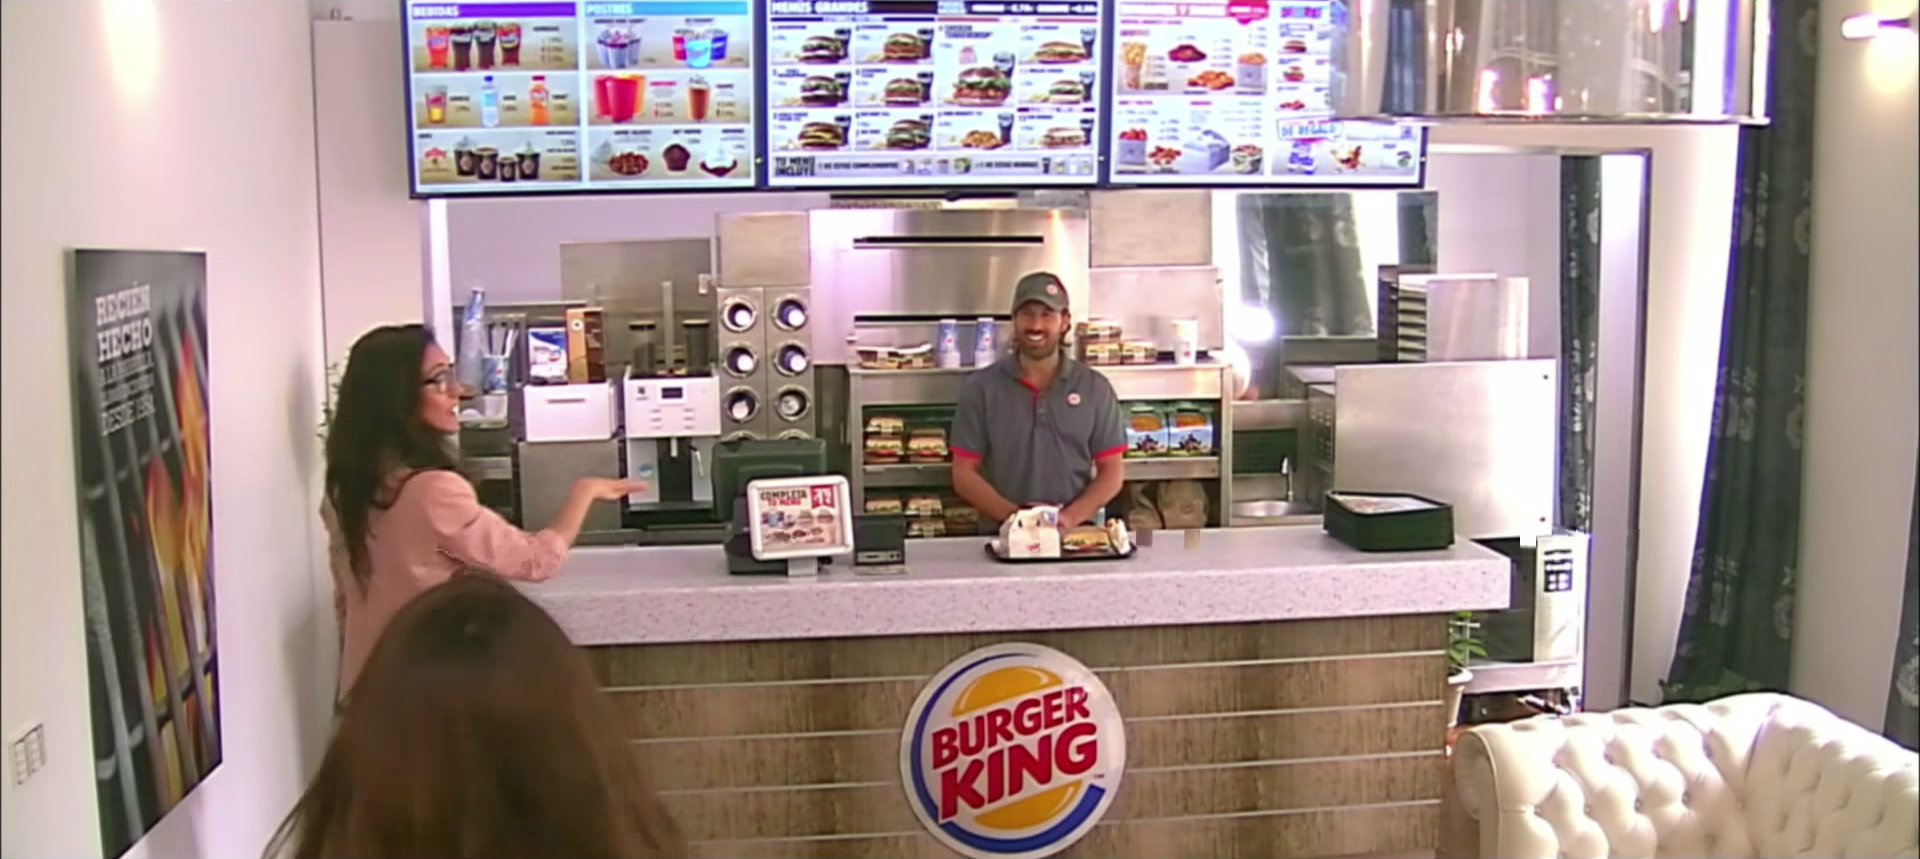 burger_king_whopper_apartment_brand_experience_experiential_2